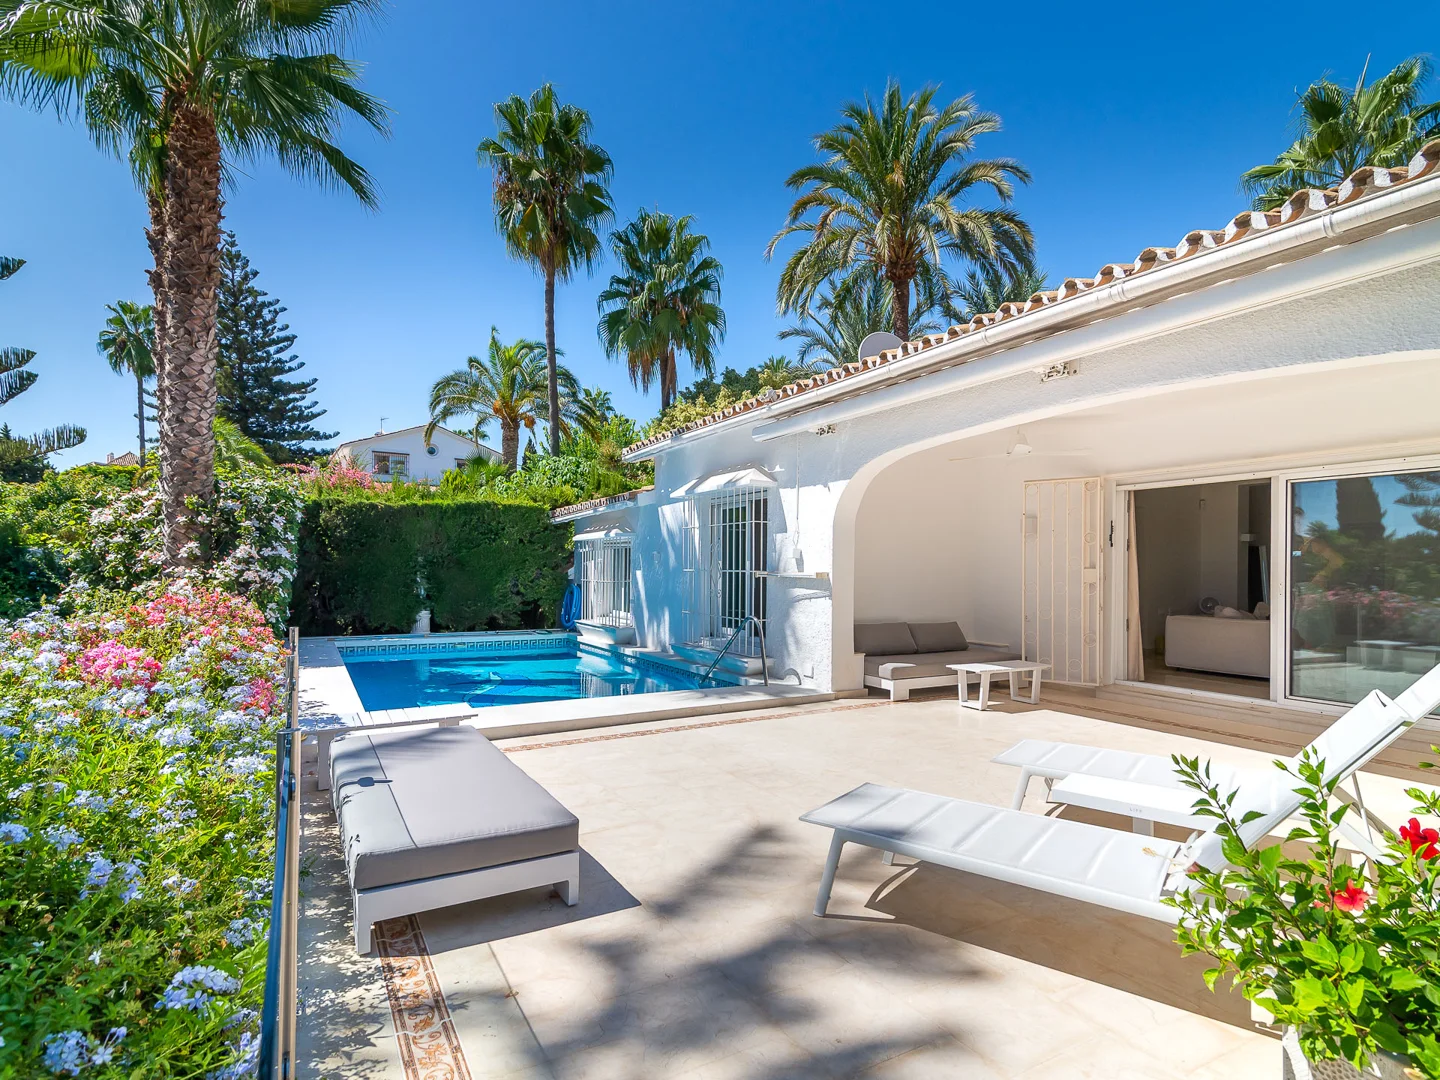 Villa with a view on The Golden Mile. Prices from 3,500€/week